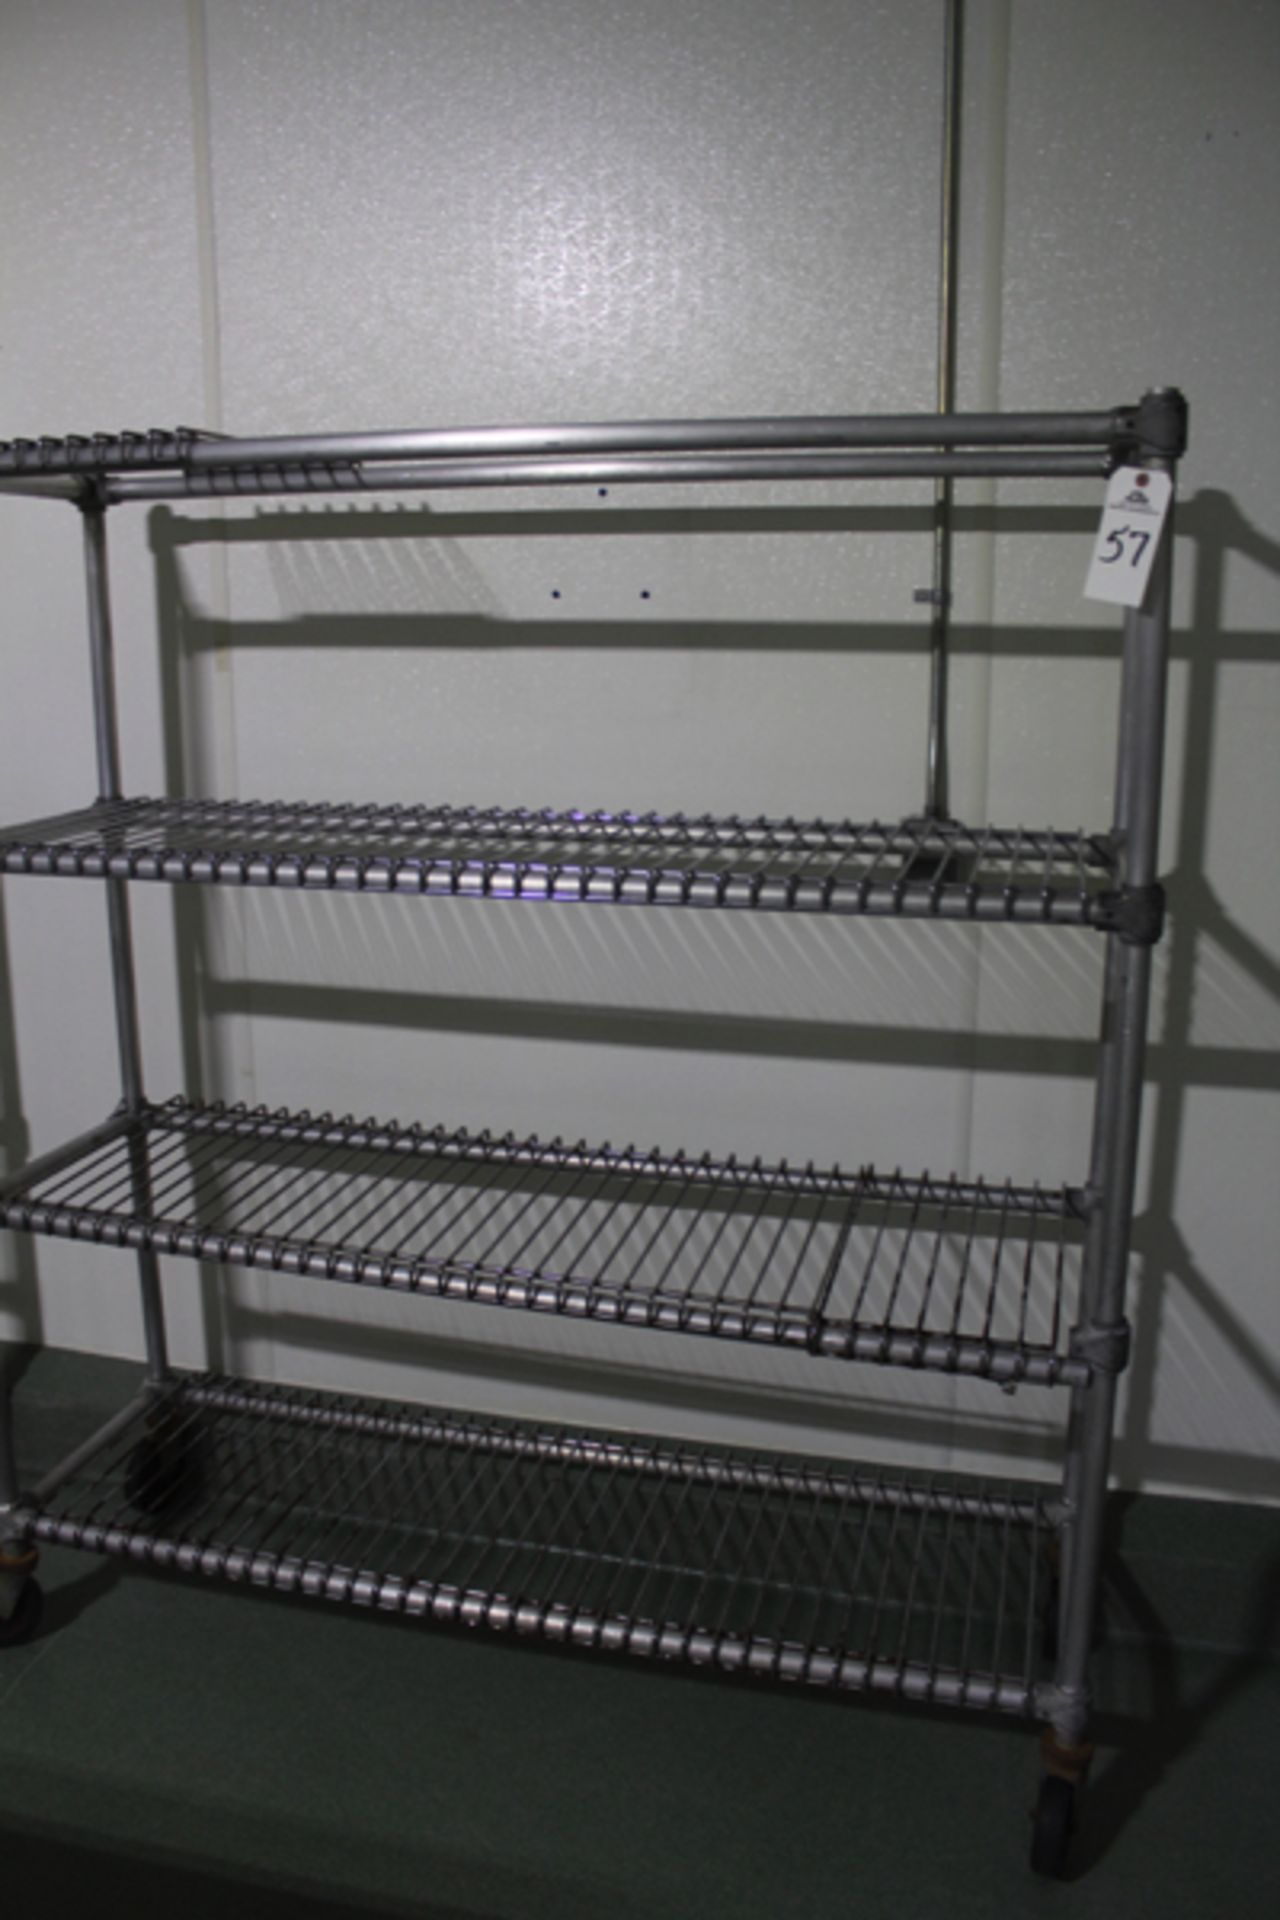 4 Tier Shelving Unit, 19" x 60" | Loading Price: $10 Or Buyer May Hand Carry By February 3rd, 2017